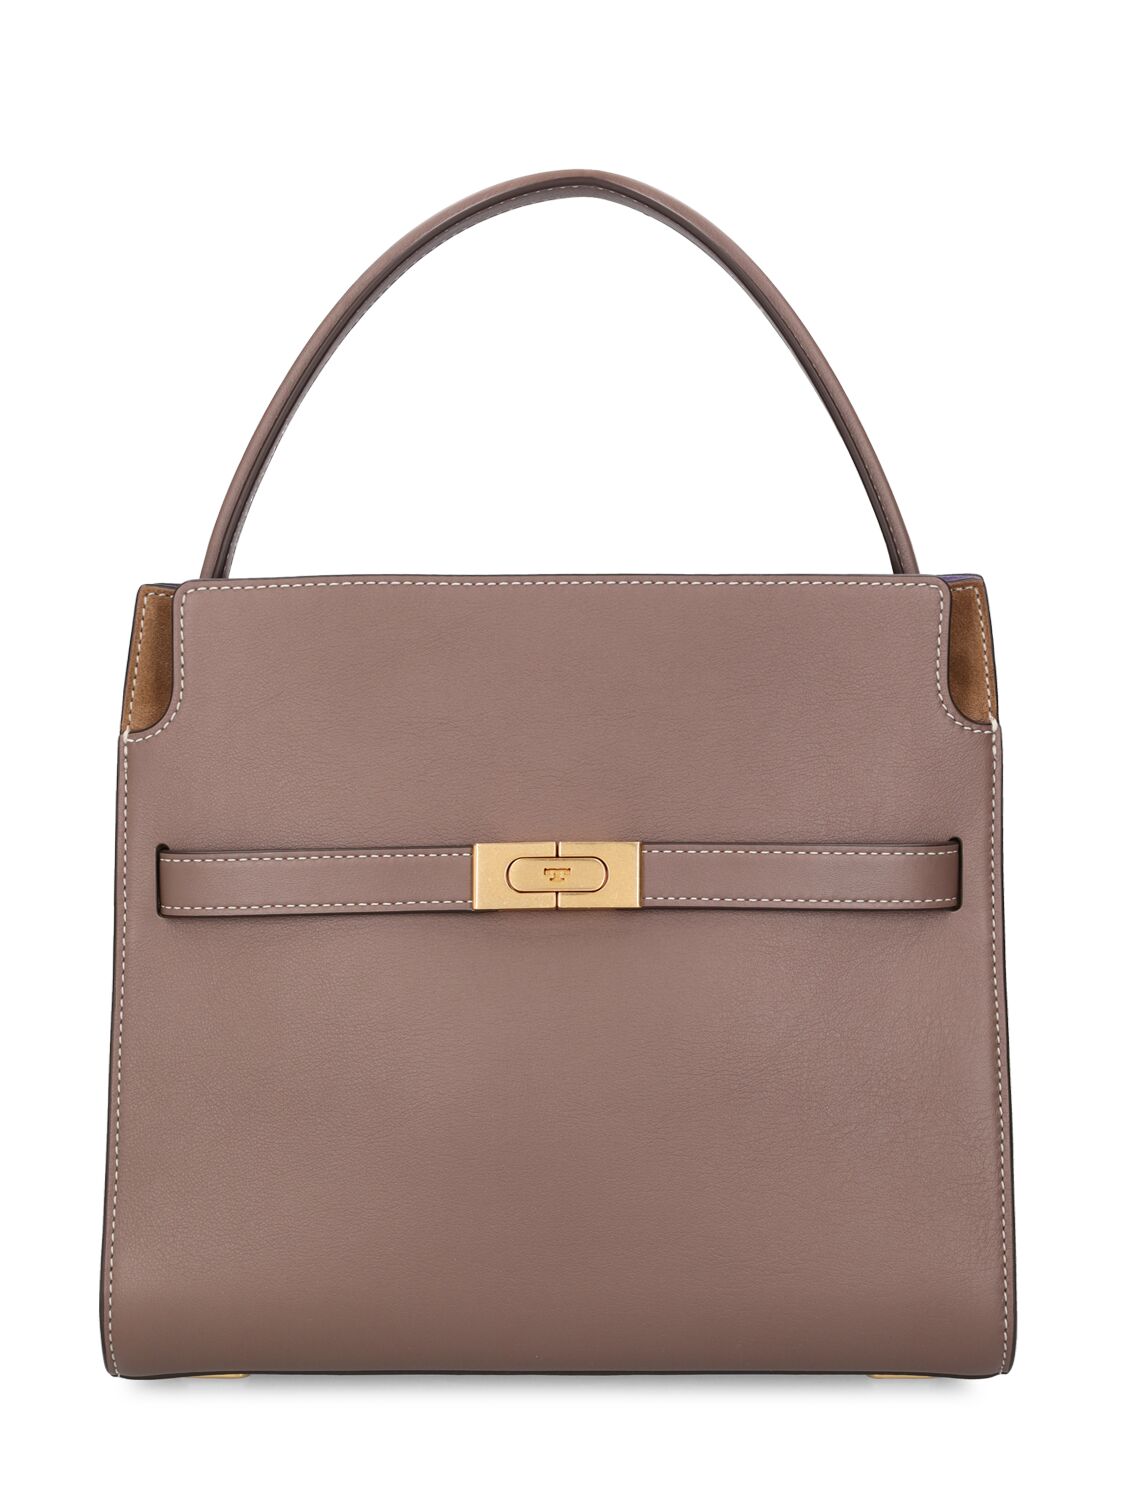 Image of Small Lee Radziwill Double Bag